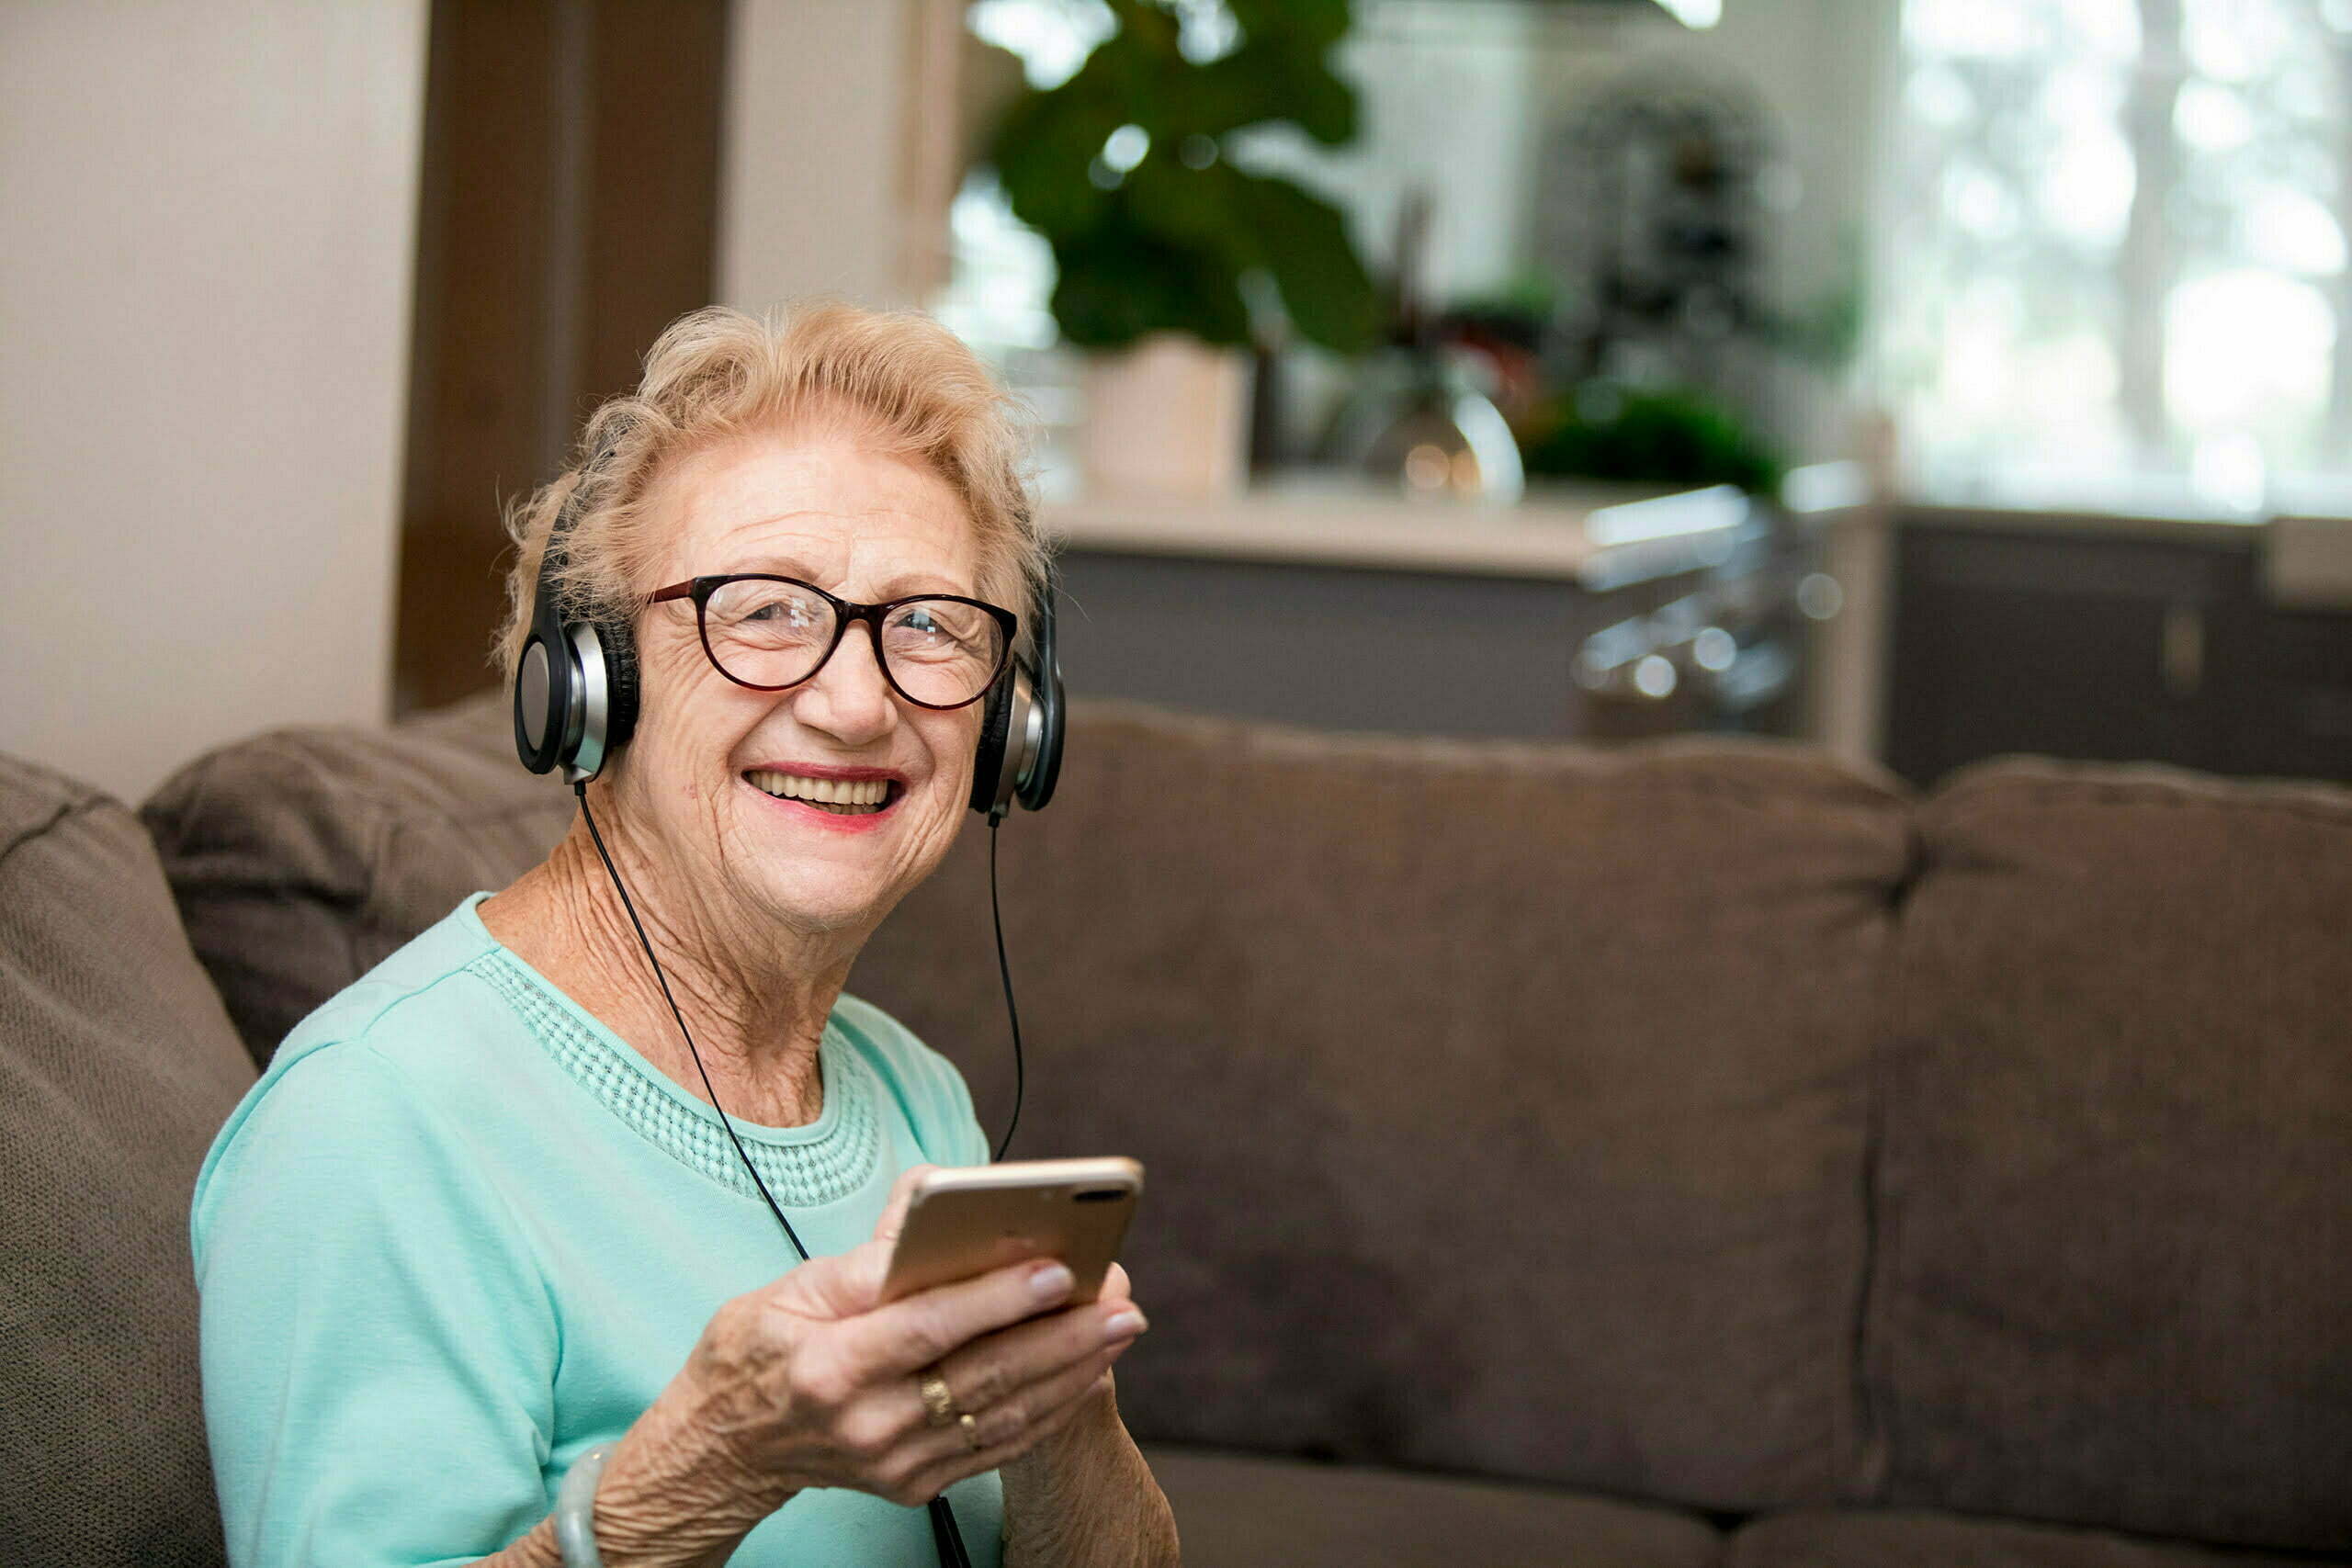 Let’s talk technology and seniors….